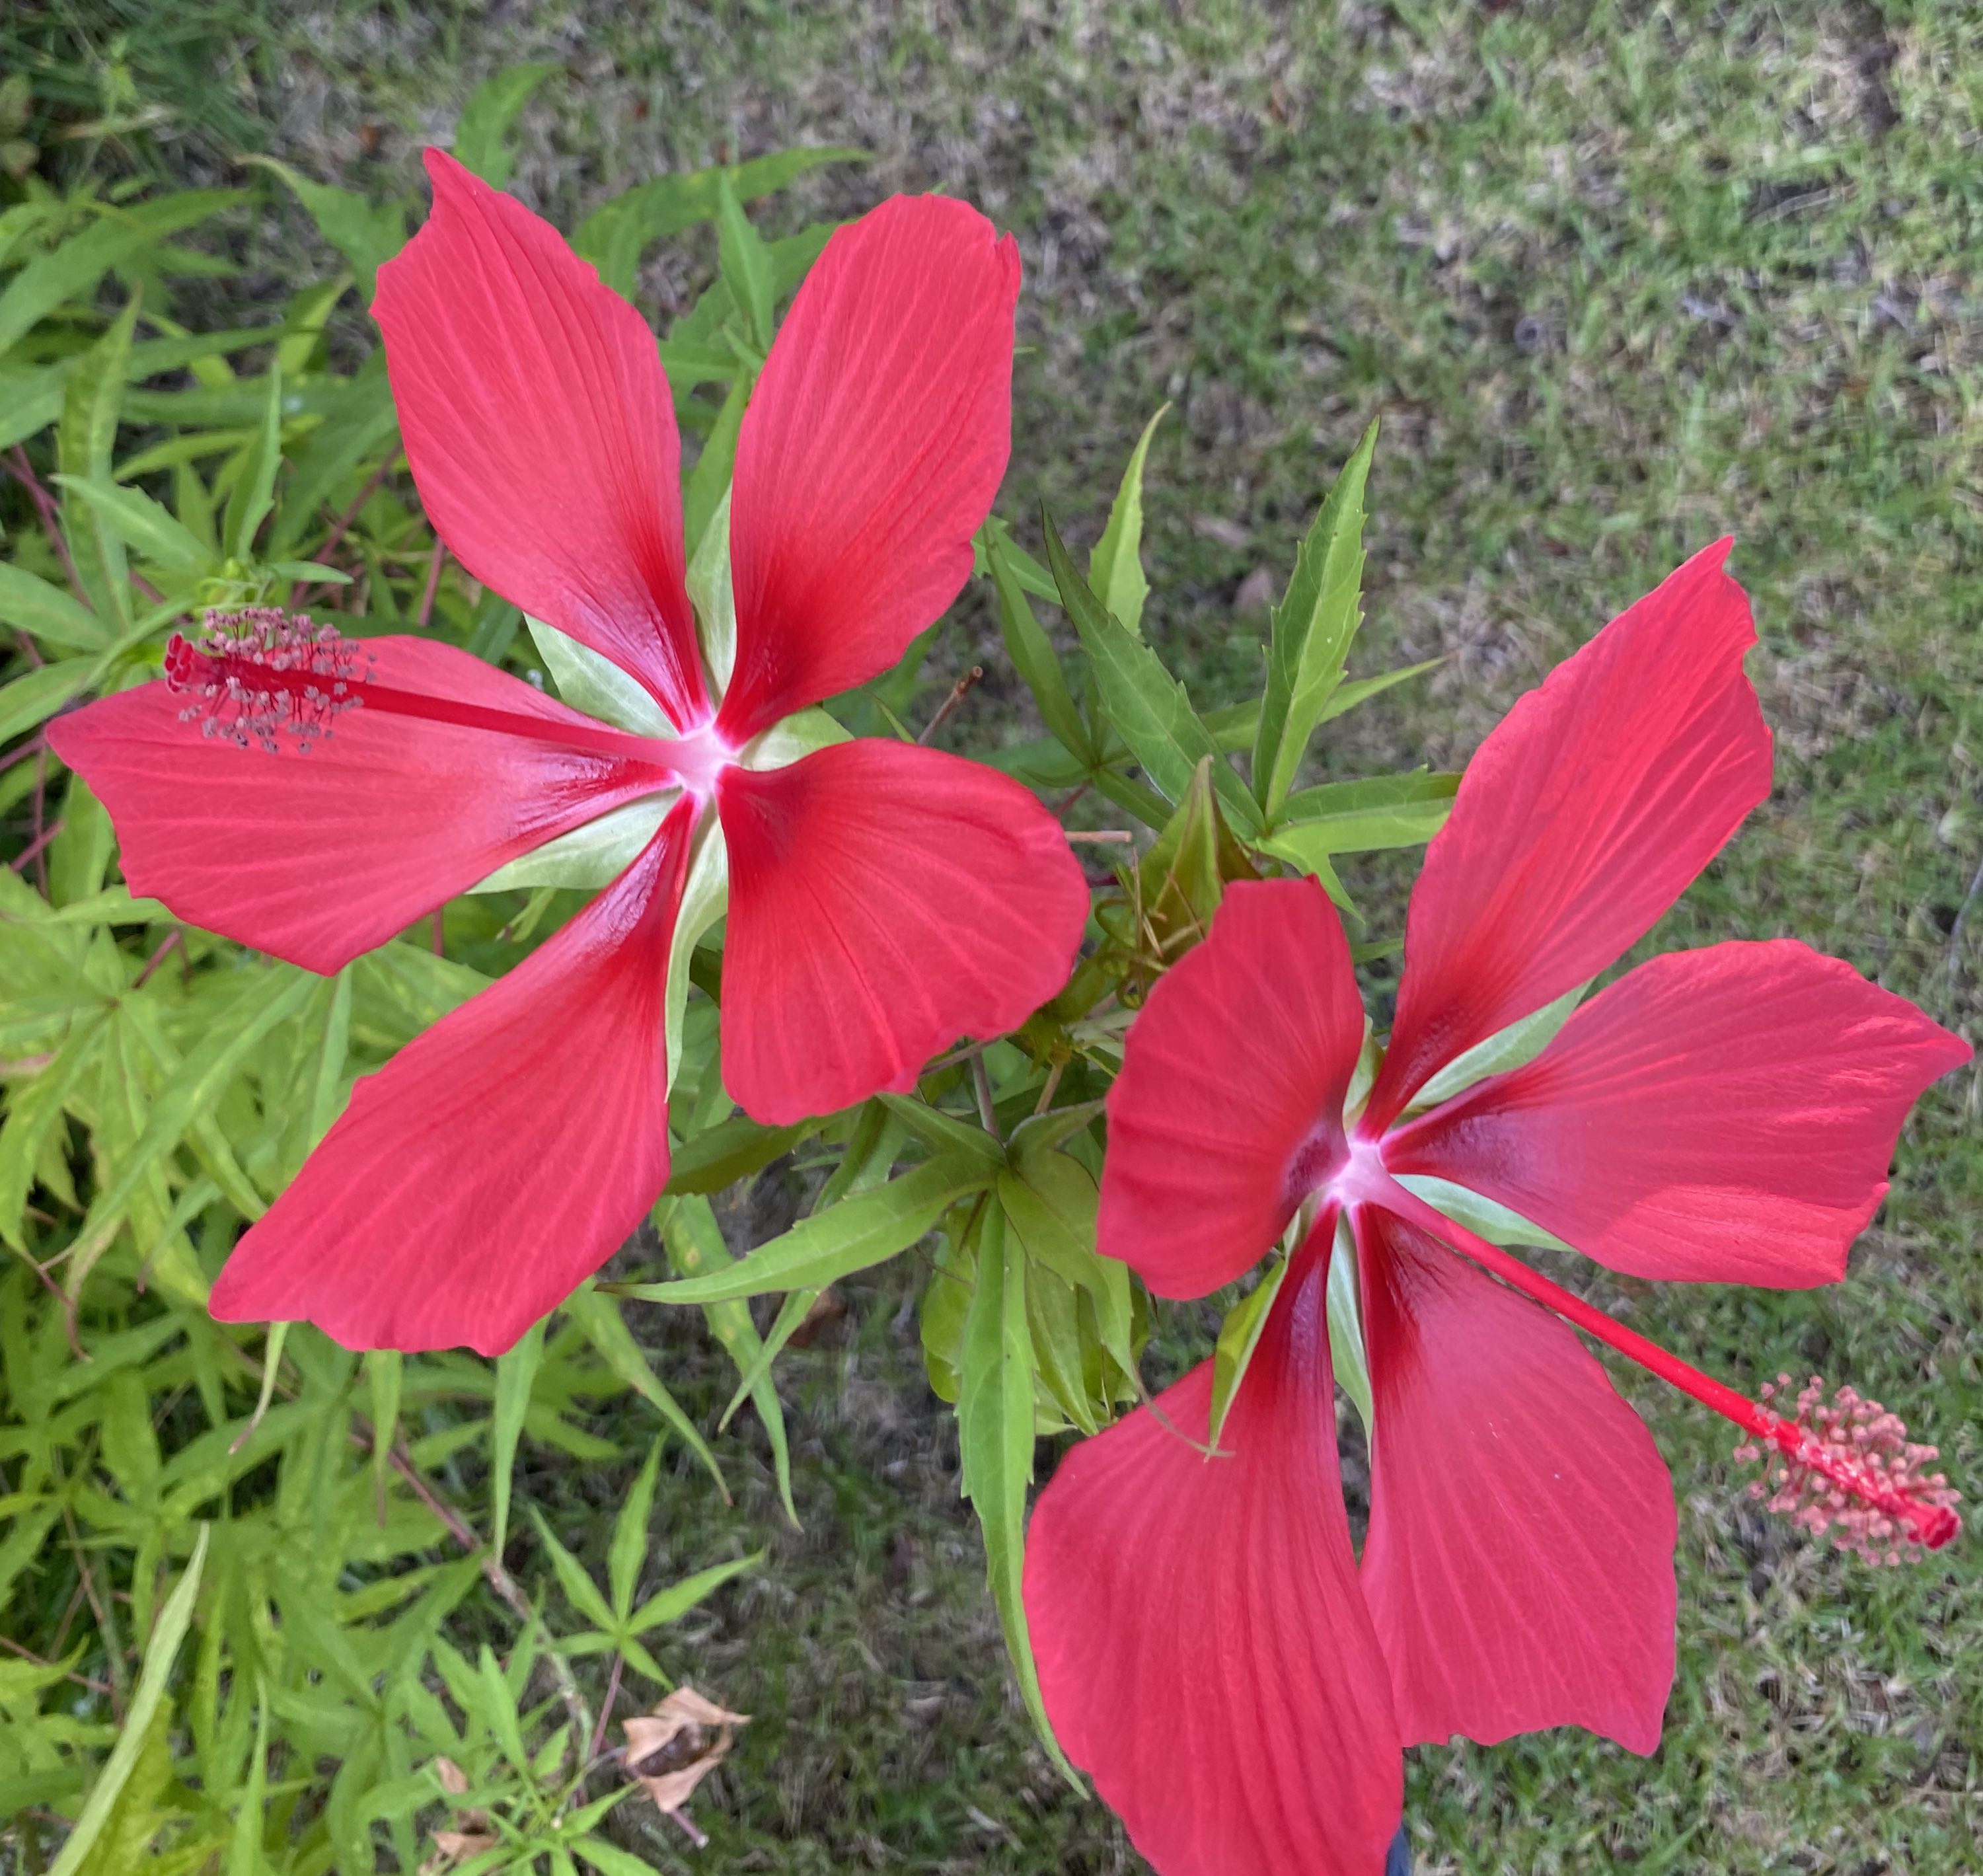 The Scientific Name is Hibiscus coccineus. You will likely hear them called Scarlet Hibiscus, Scarlet Rosemallow, Red Hibiscus. This picture shows the Brilliant crimson-red flowers. of Hibiscus coccineus